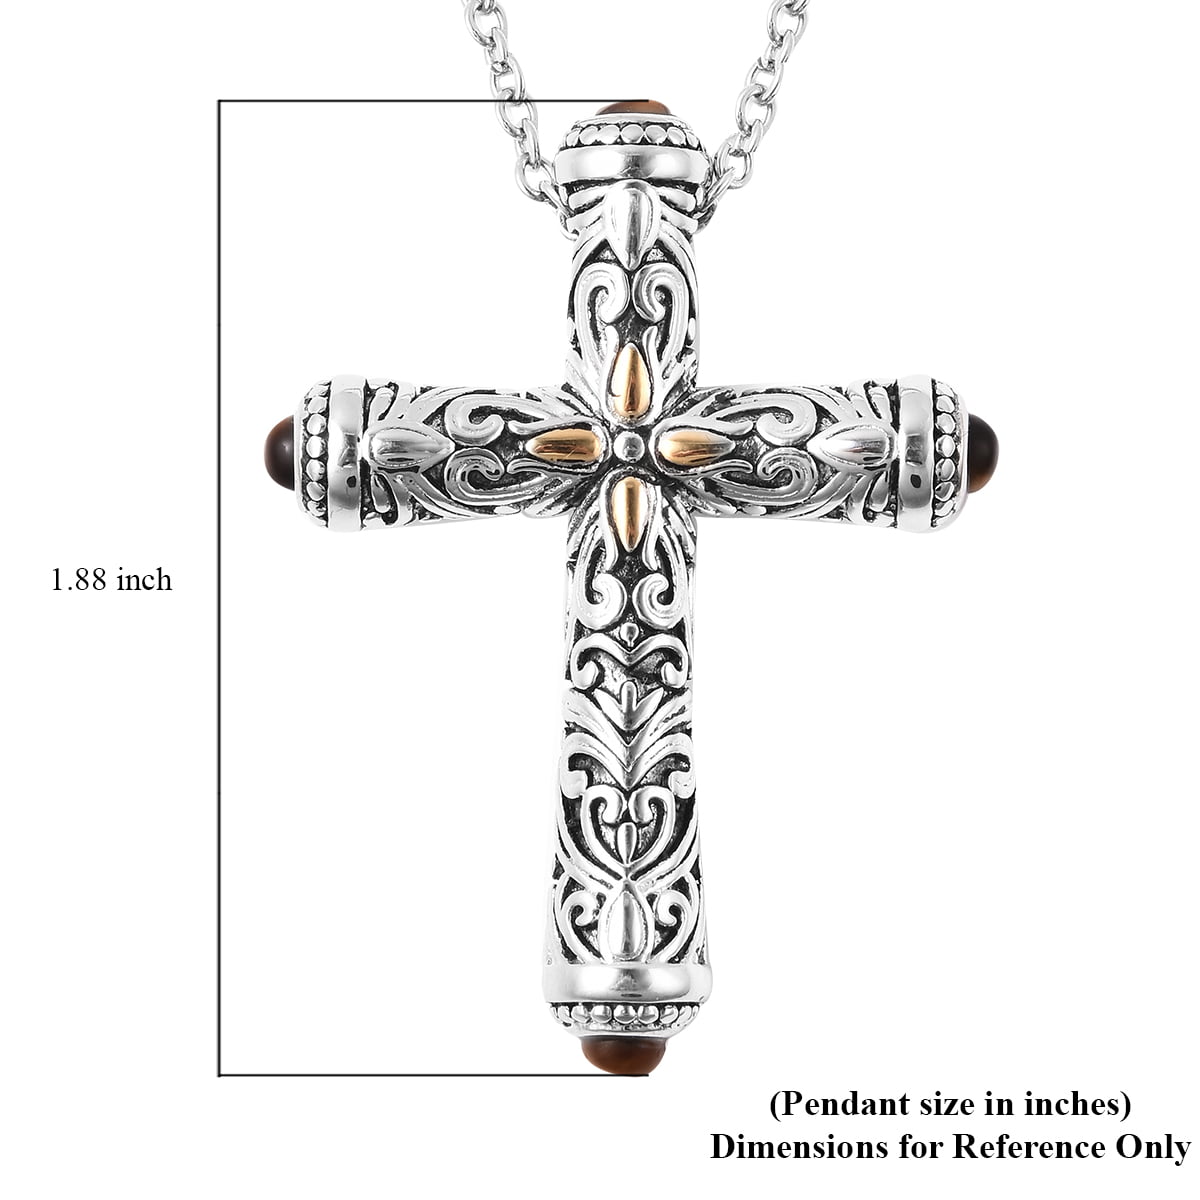 Lovely Old Fashioned Look Rhinestone Cross with Faux Tiger Eye Setting Set 